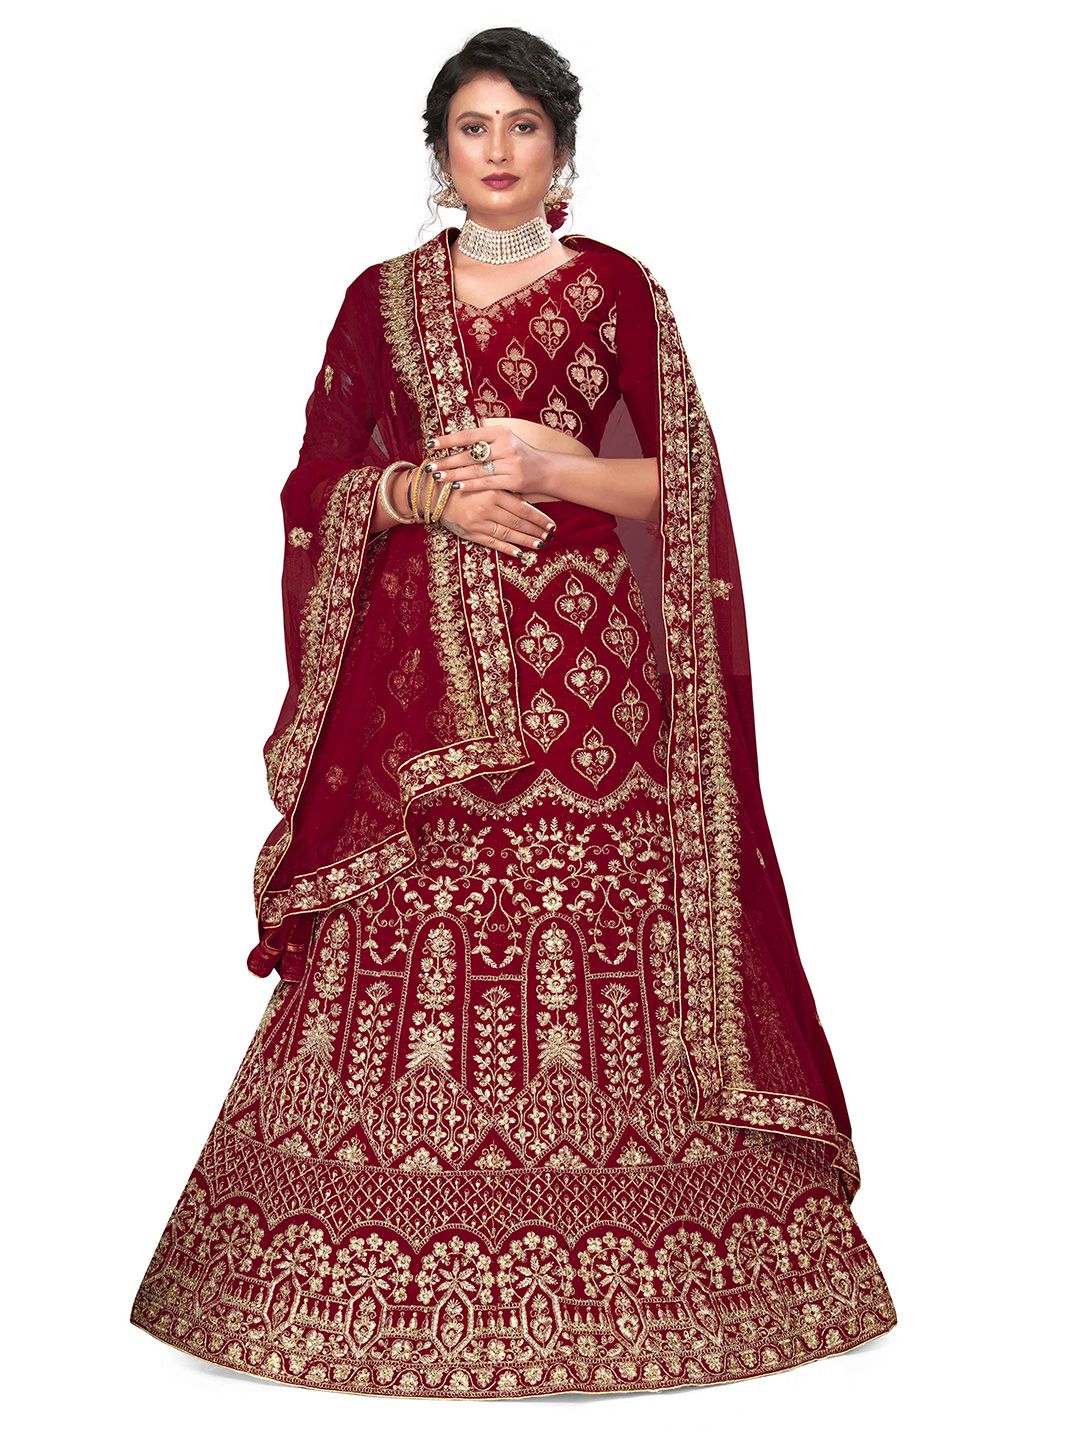 MANVAA Embroidered Thread Work Semi-Stitched Lehenga & Unstitched Blouse With Dupatta Price in India